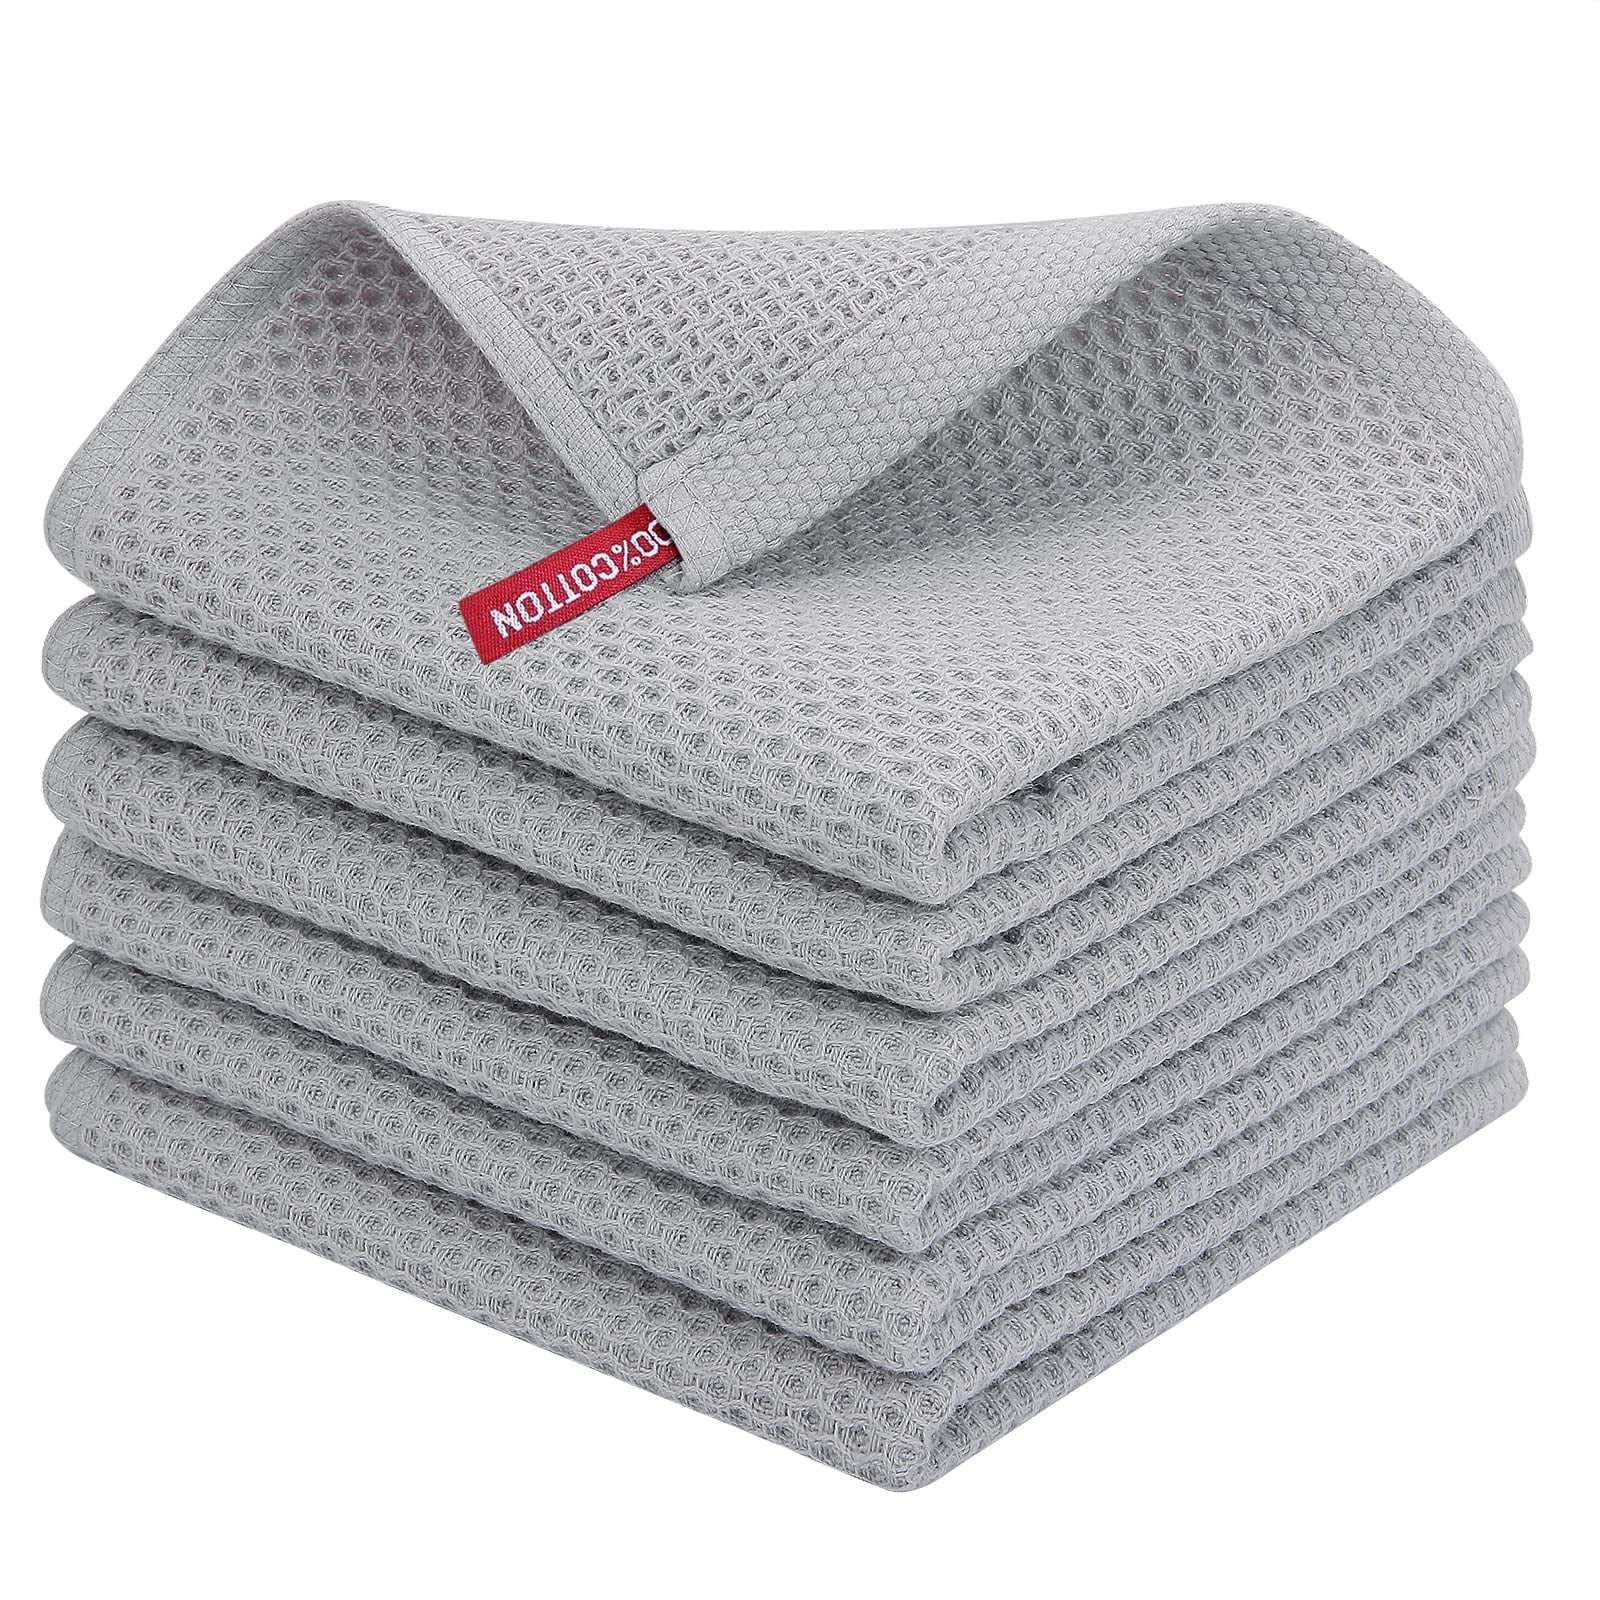 ProHomTex Microfiber Kitchen Dish Hand Towels, Waffle Weave Set of 6 (16” x  28”) Highly Absorbent (Grey)